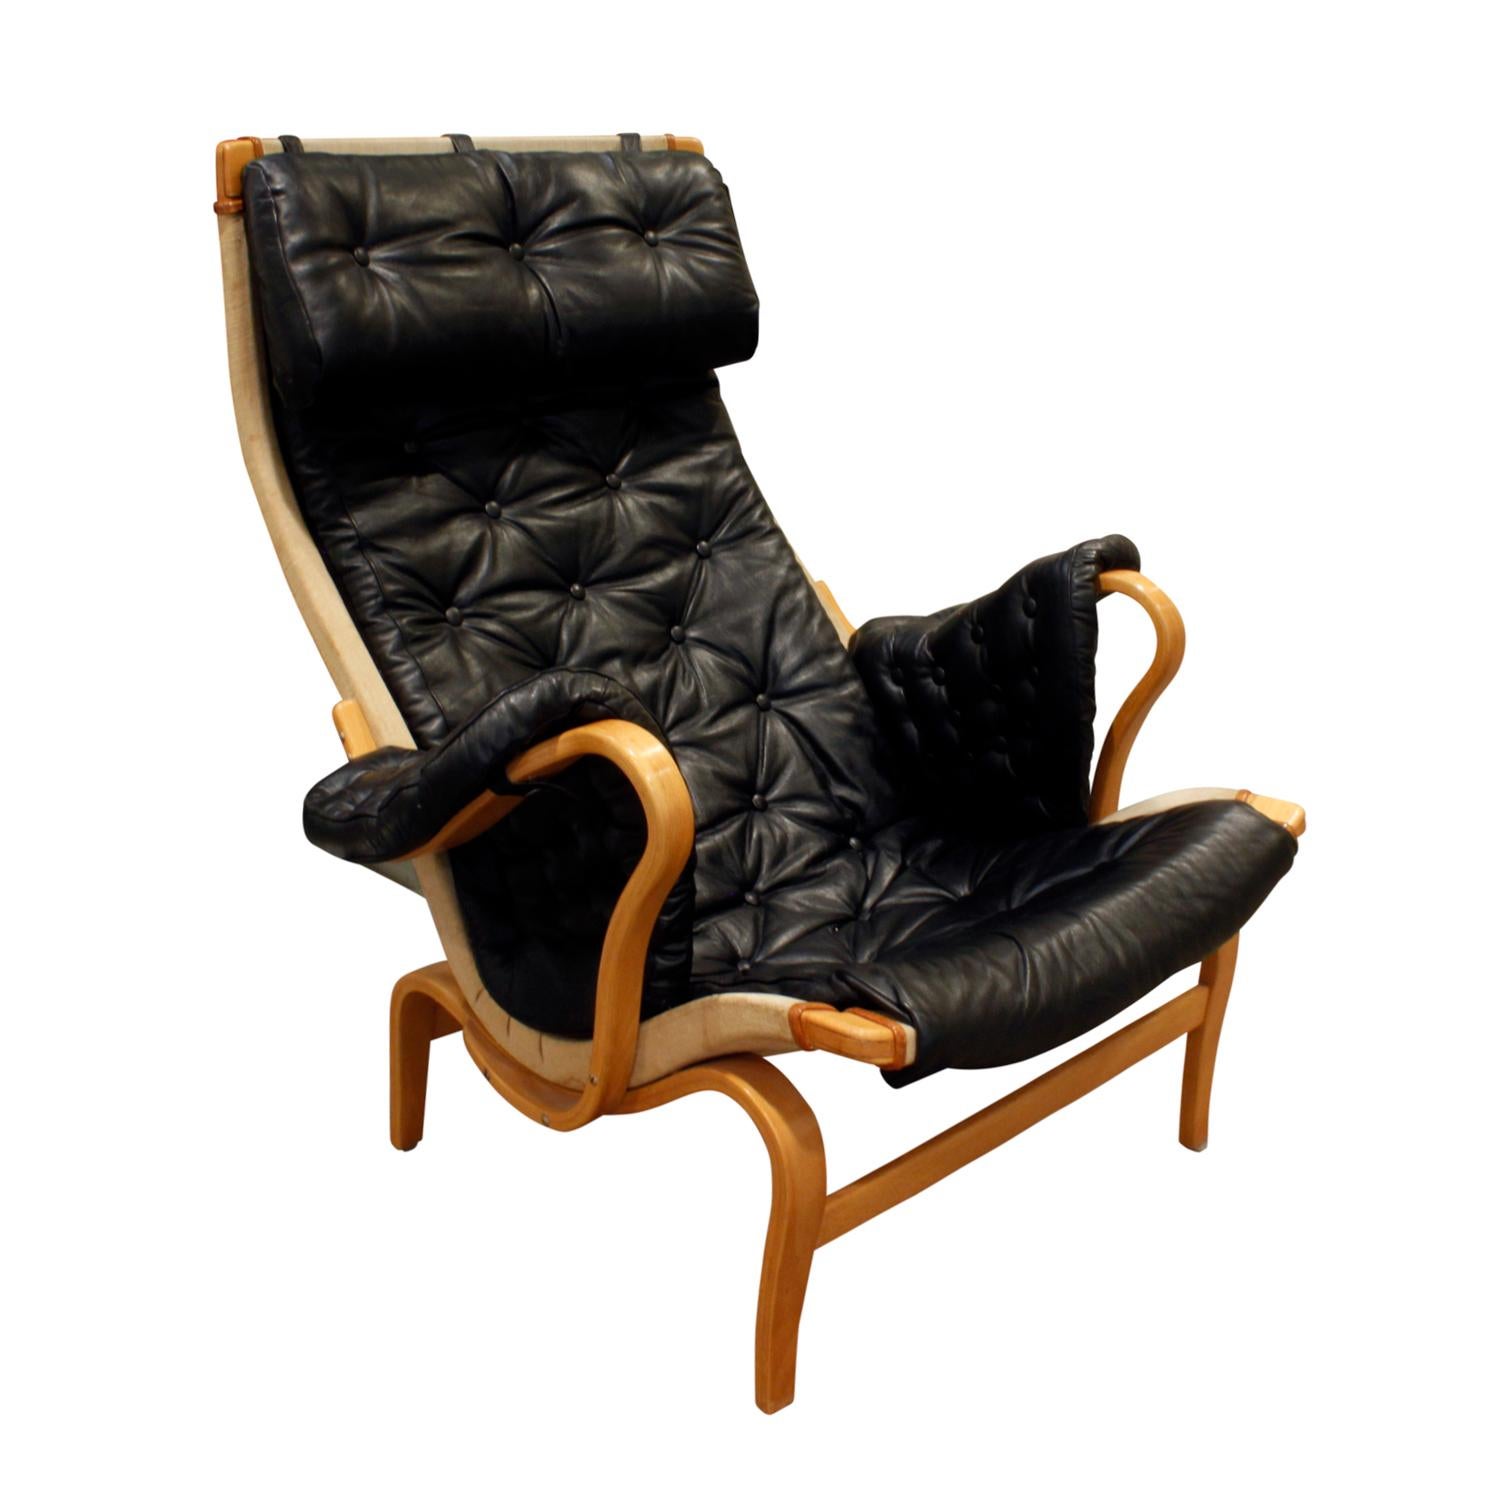 Bruno Mathsson "Pernilla Lounge Chair" with Tufted Black Leather 1969 'Signed'